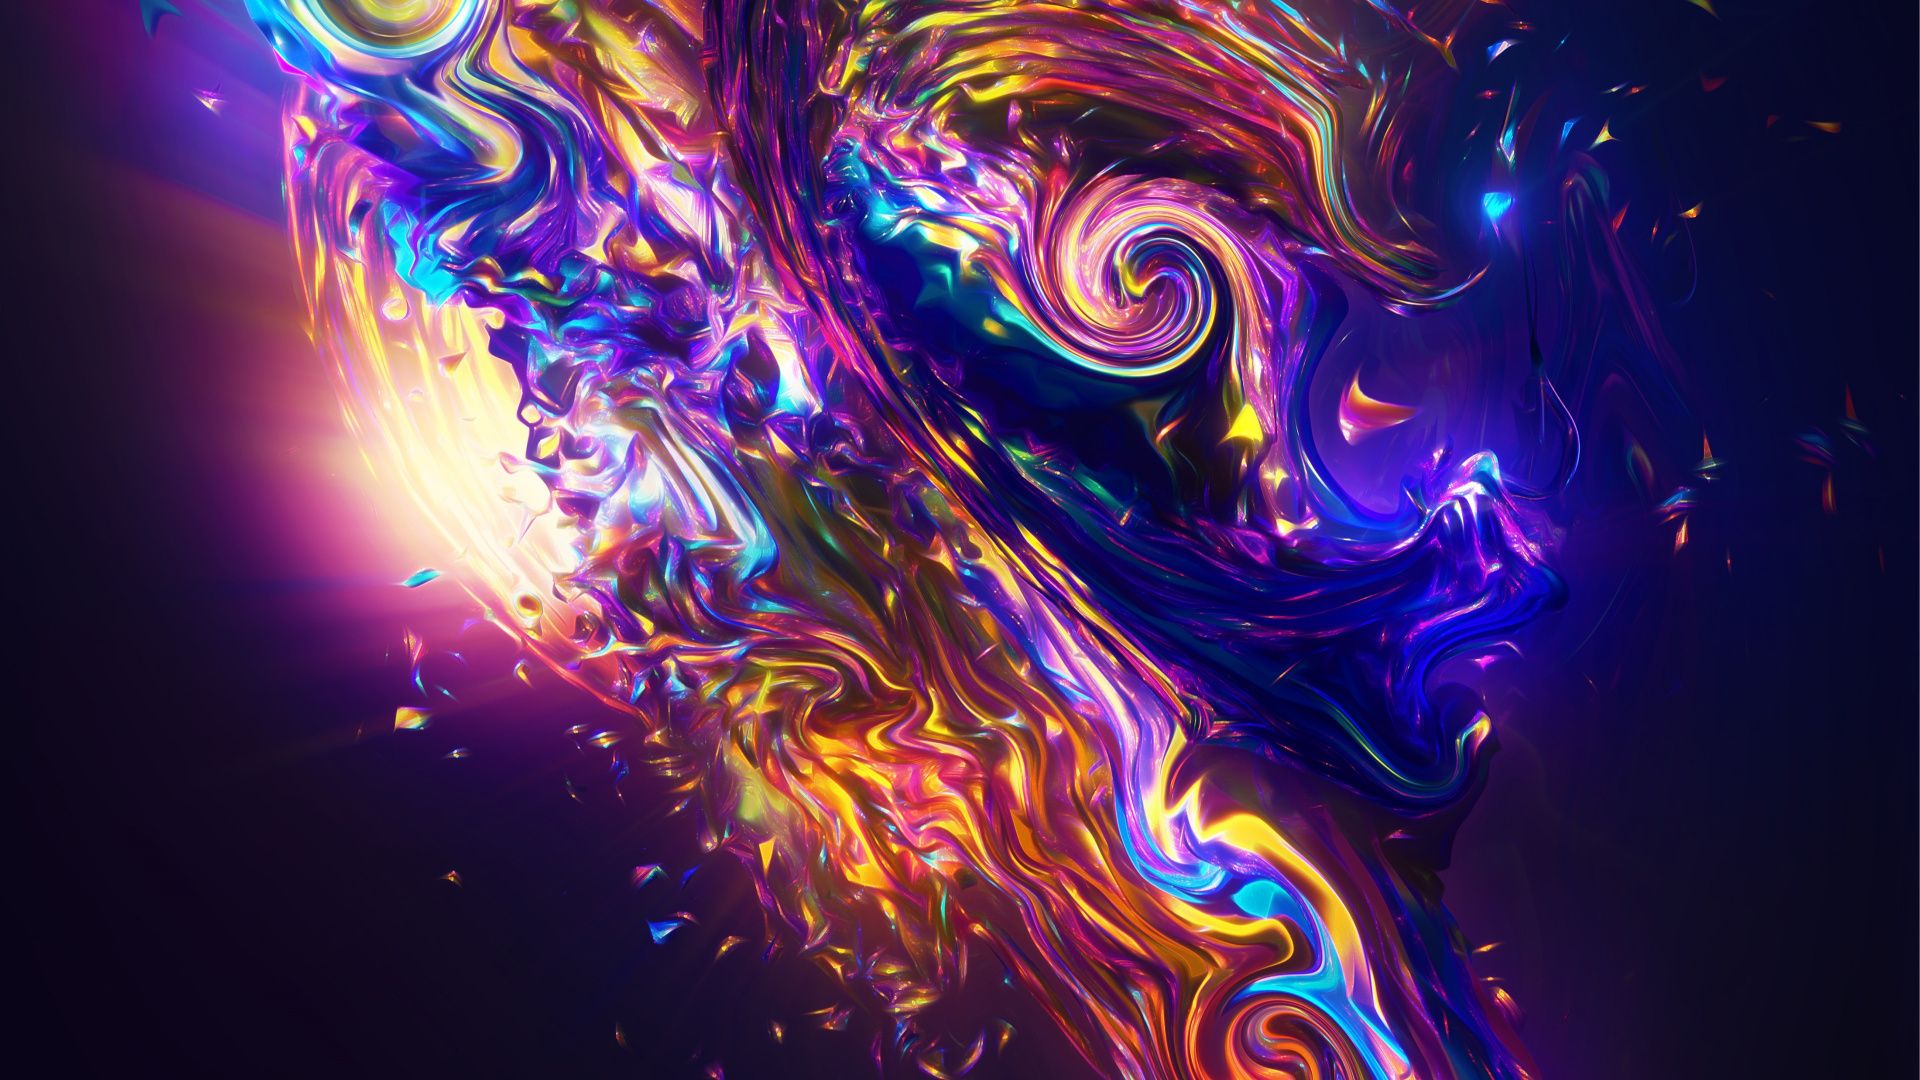 Download Carnival, colorful, fractal, abstract wallpaper, 1920x Full HD, HDTV, FHD, 1080p